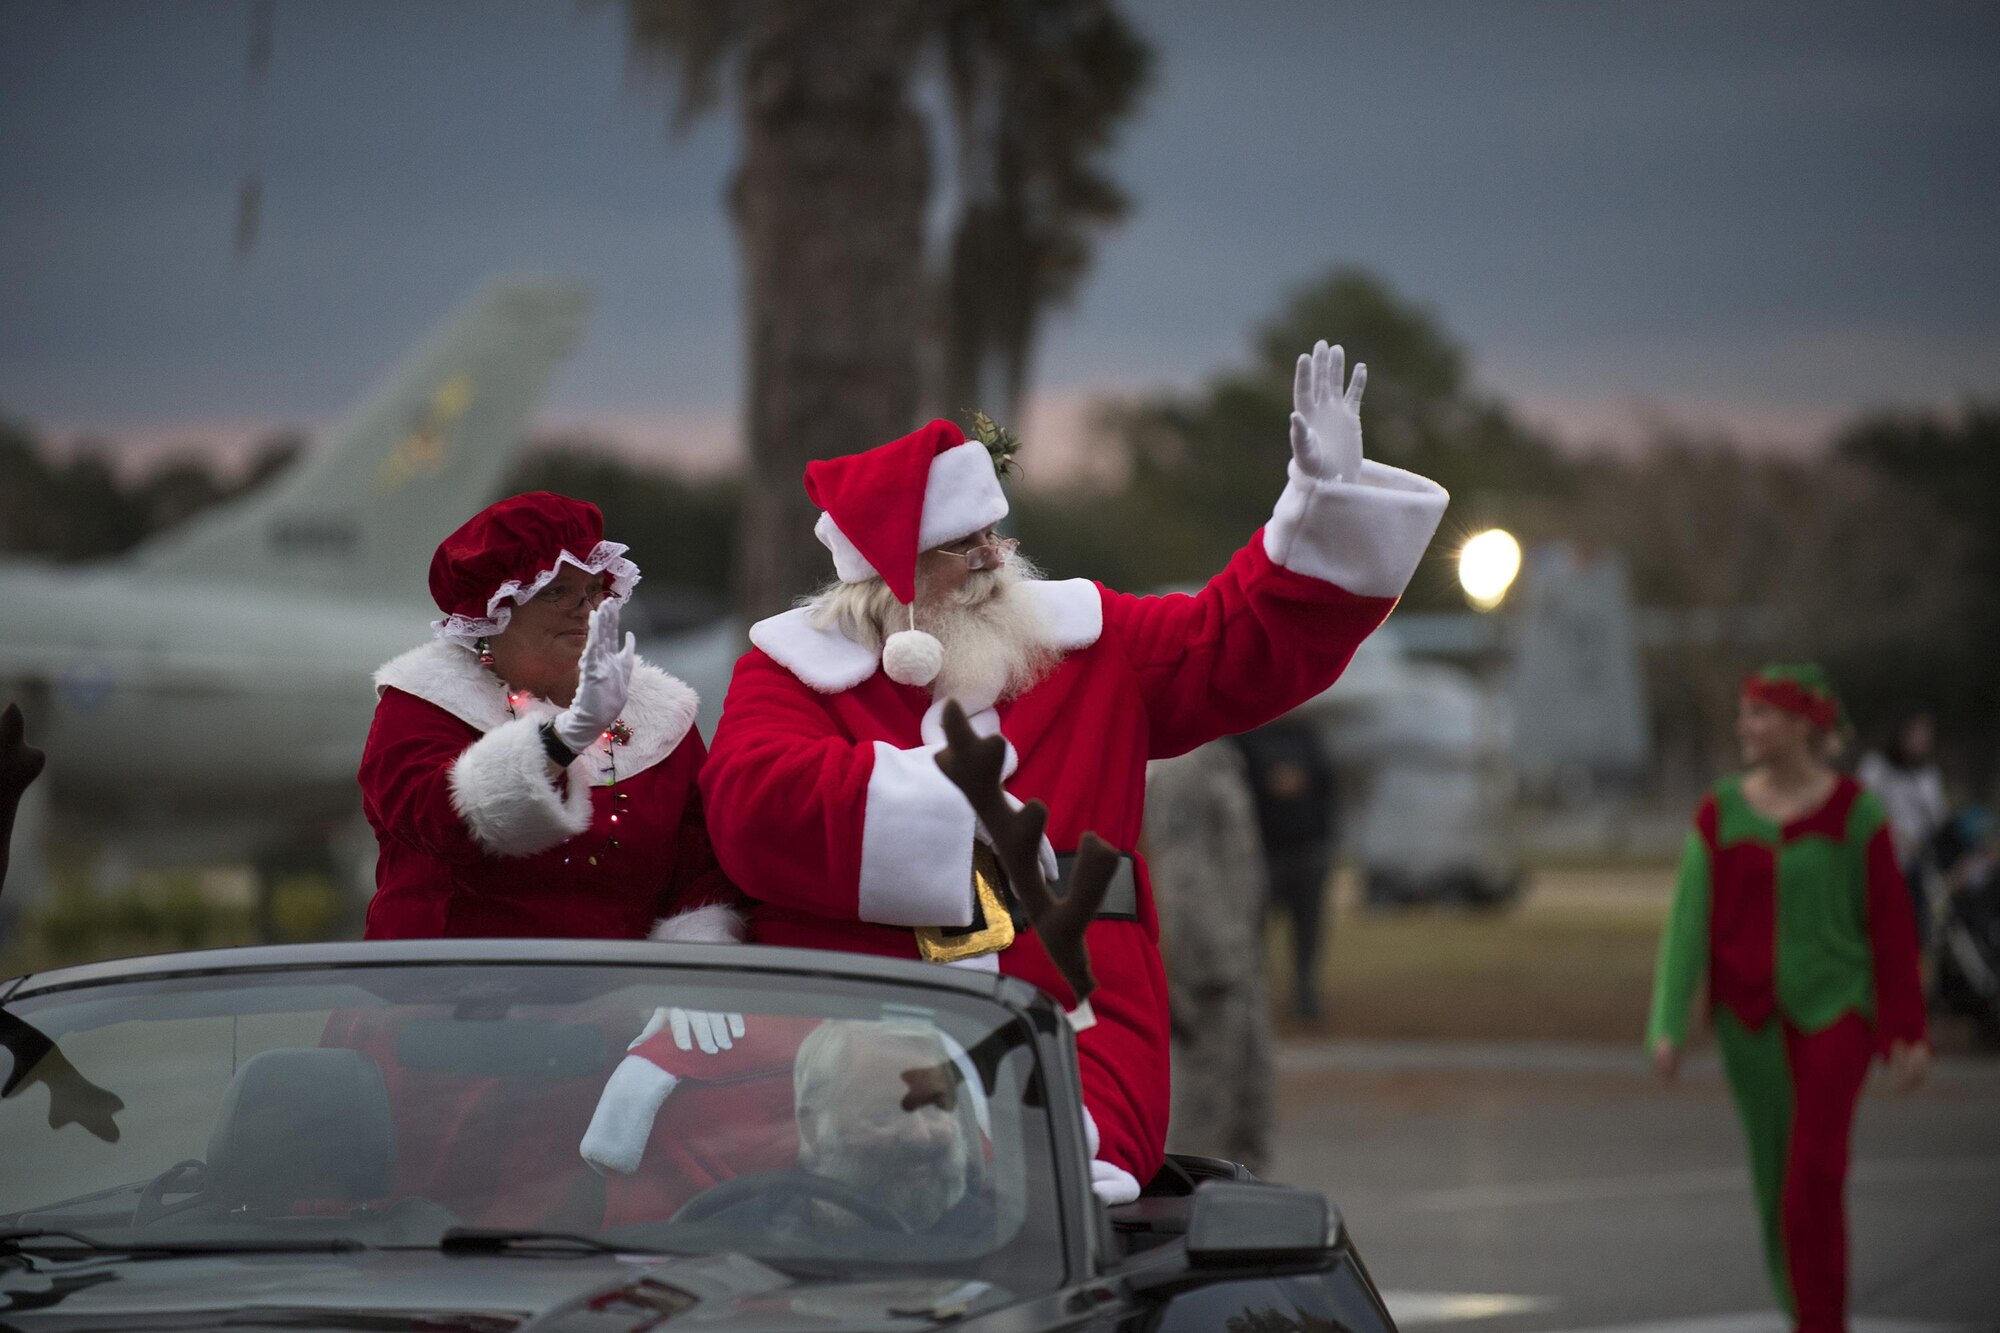 Santa and Mrs. Claus wave during a parade, Dec. 1, 2017, at Moody Air Force Base, Ga. The annual event brings the base community together as a way to show thanks for their continuous sacrifice and celebrate the holiday season. The celebration included a parade, raffle give-a-ways, children’s activities and traditional lighting of the base Christmas tree by families of deployed Airmen. (U.S. Air Force photo by Andrea Jenkins)